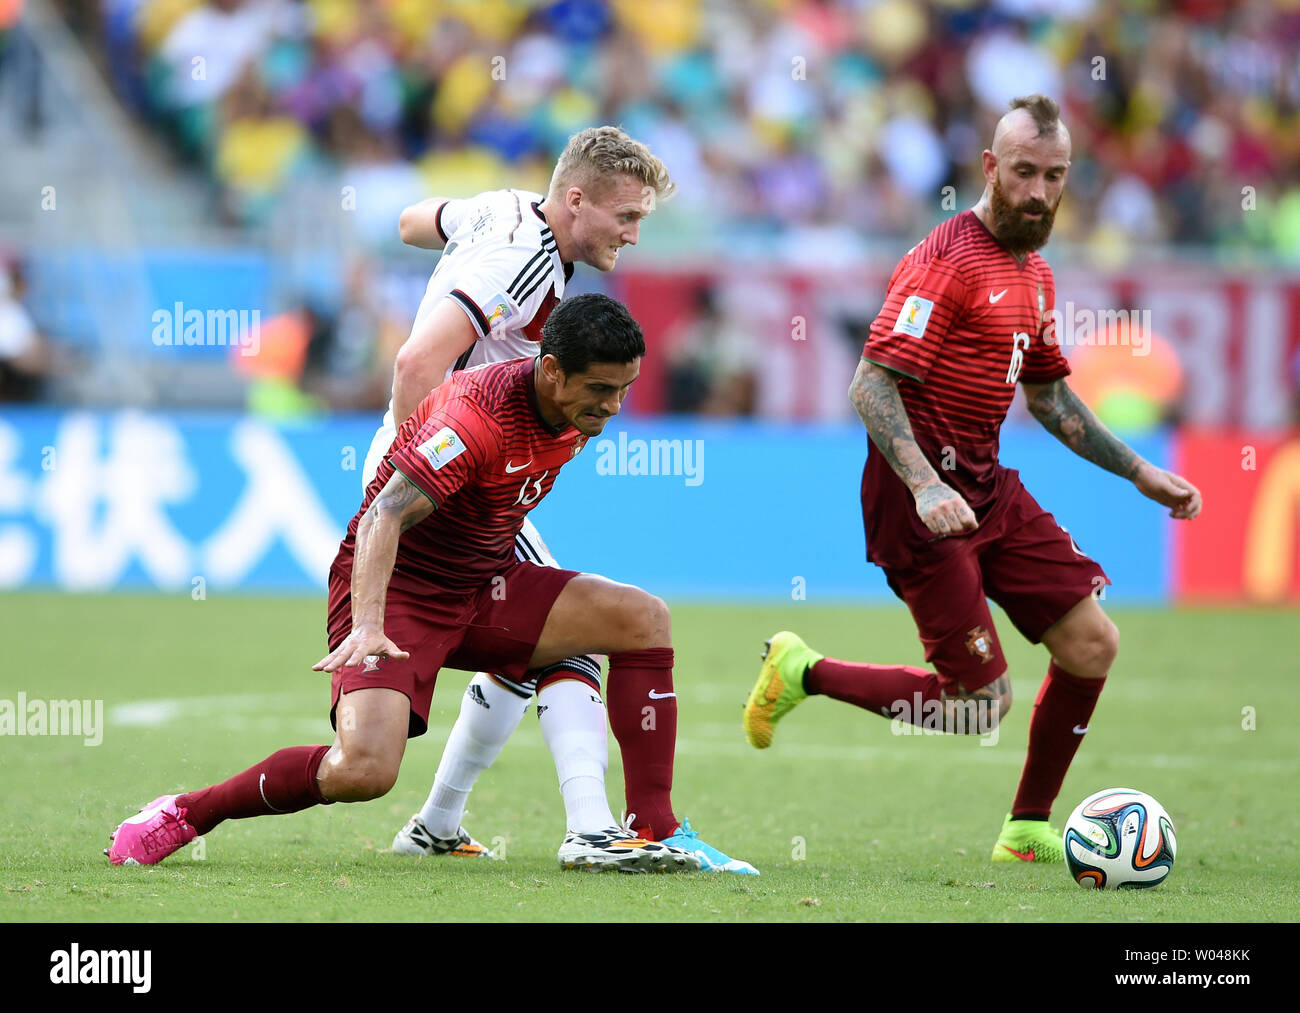 Andre Schurrle (L) of Germany competes with Ricardo Costa of Portugal during the 2014 FIFA World Cup Group G match at the Arena Fonte Nova in Salvador, Brazil on June 16, 2014. UPI/Chris Brunskill Stock Photo